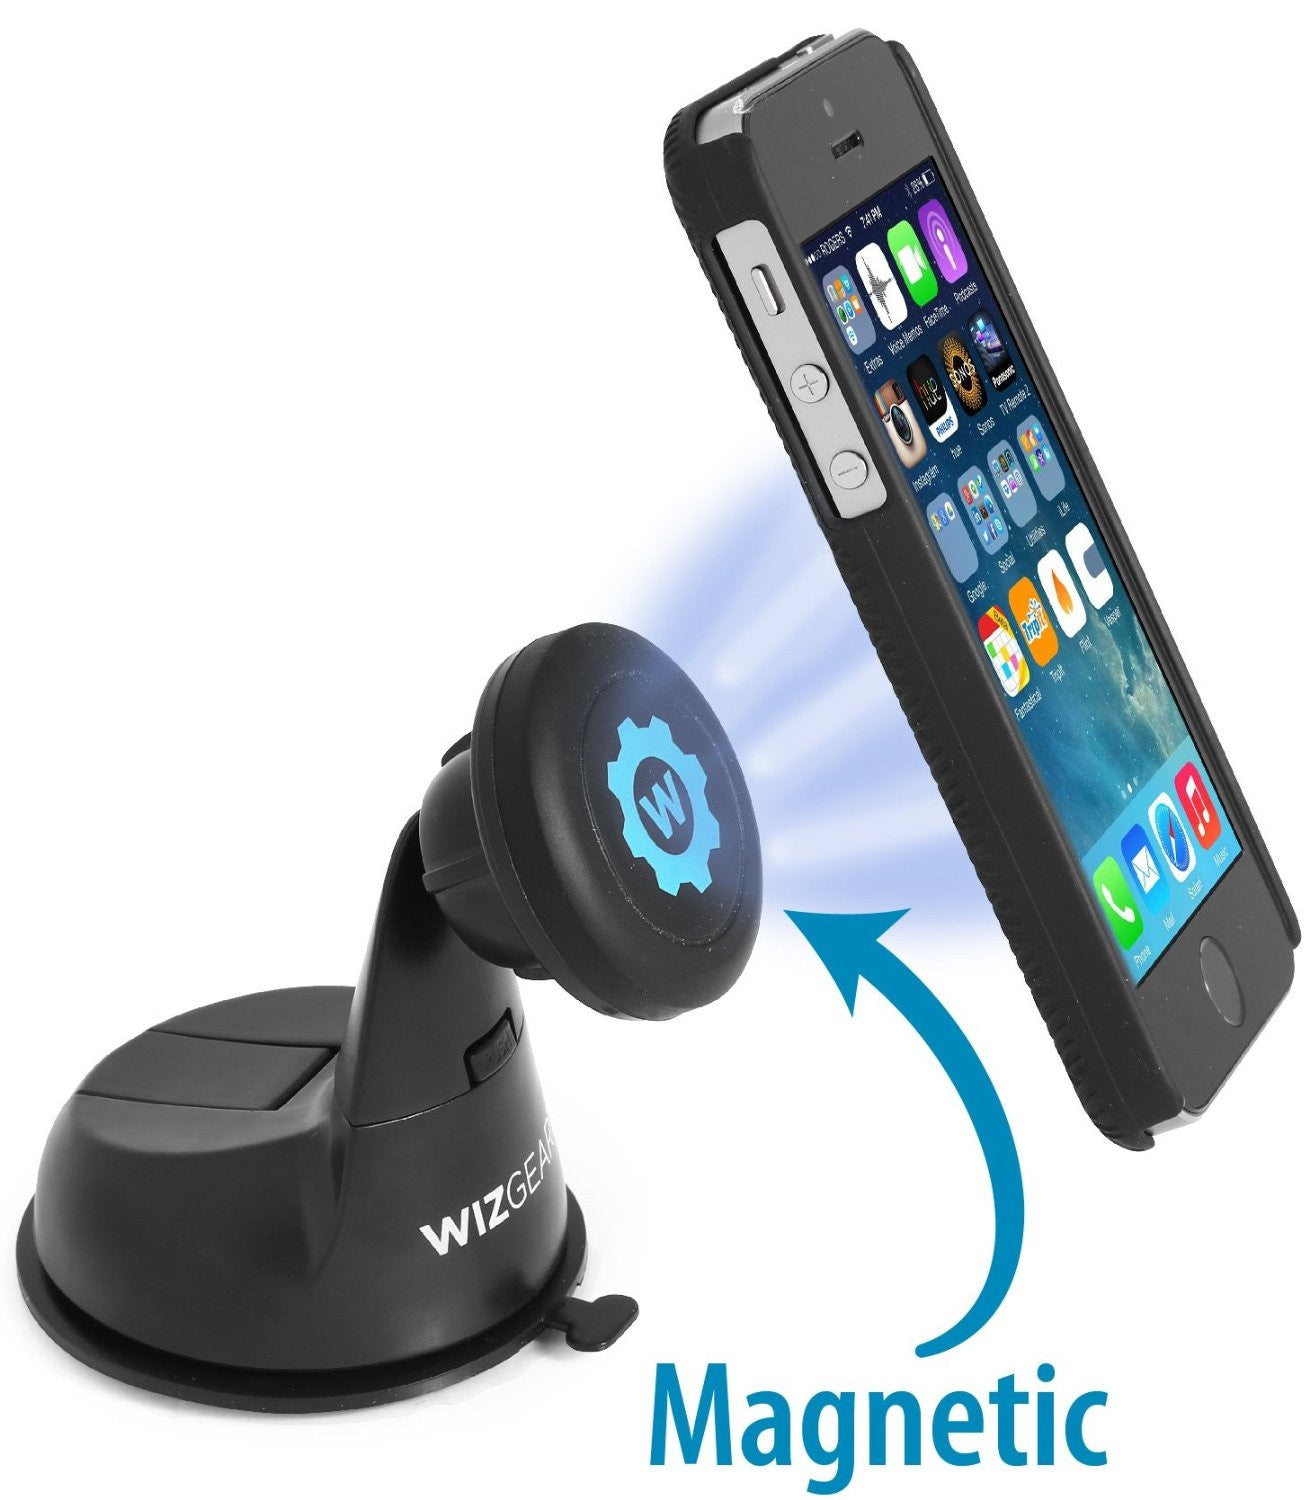 WixGear Universal Magnetic Car Mount Holder, Windshield Mount and Dashboard Mount Holder for Cell Phones with Fast Swift-snap™ Technology